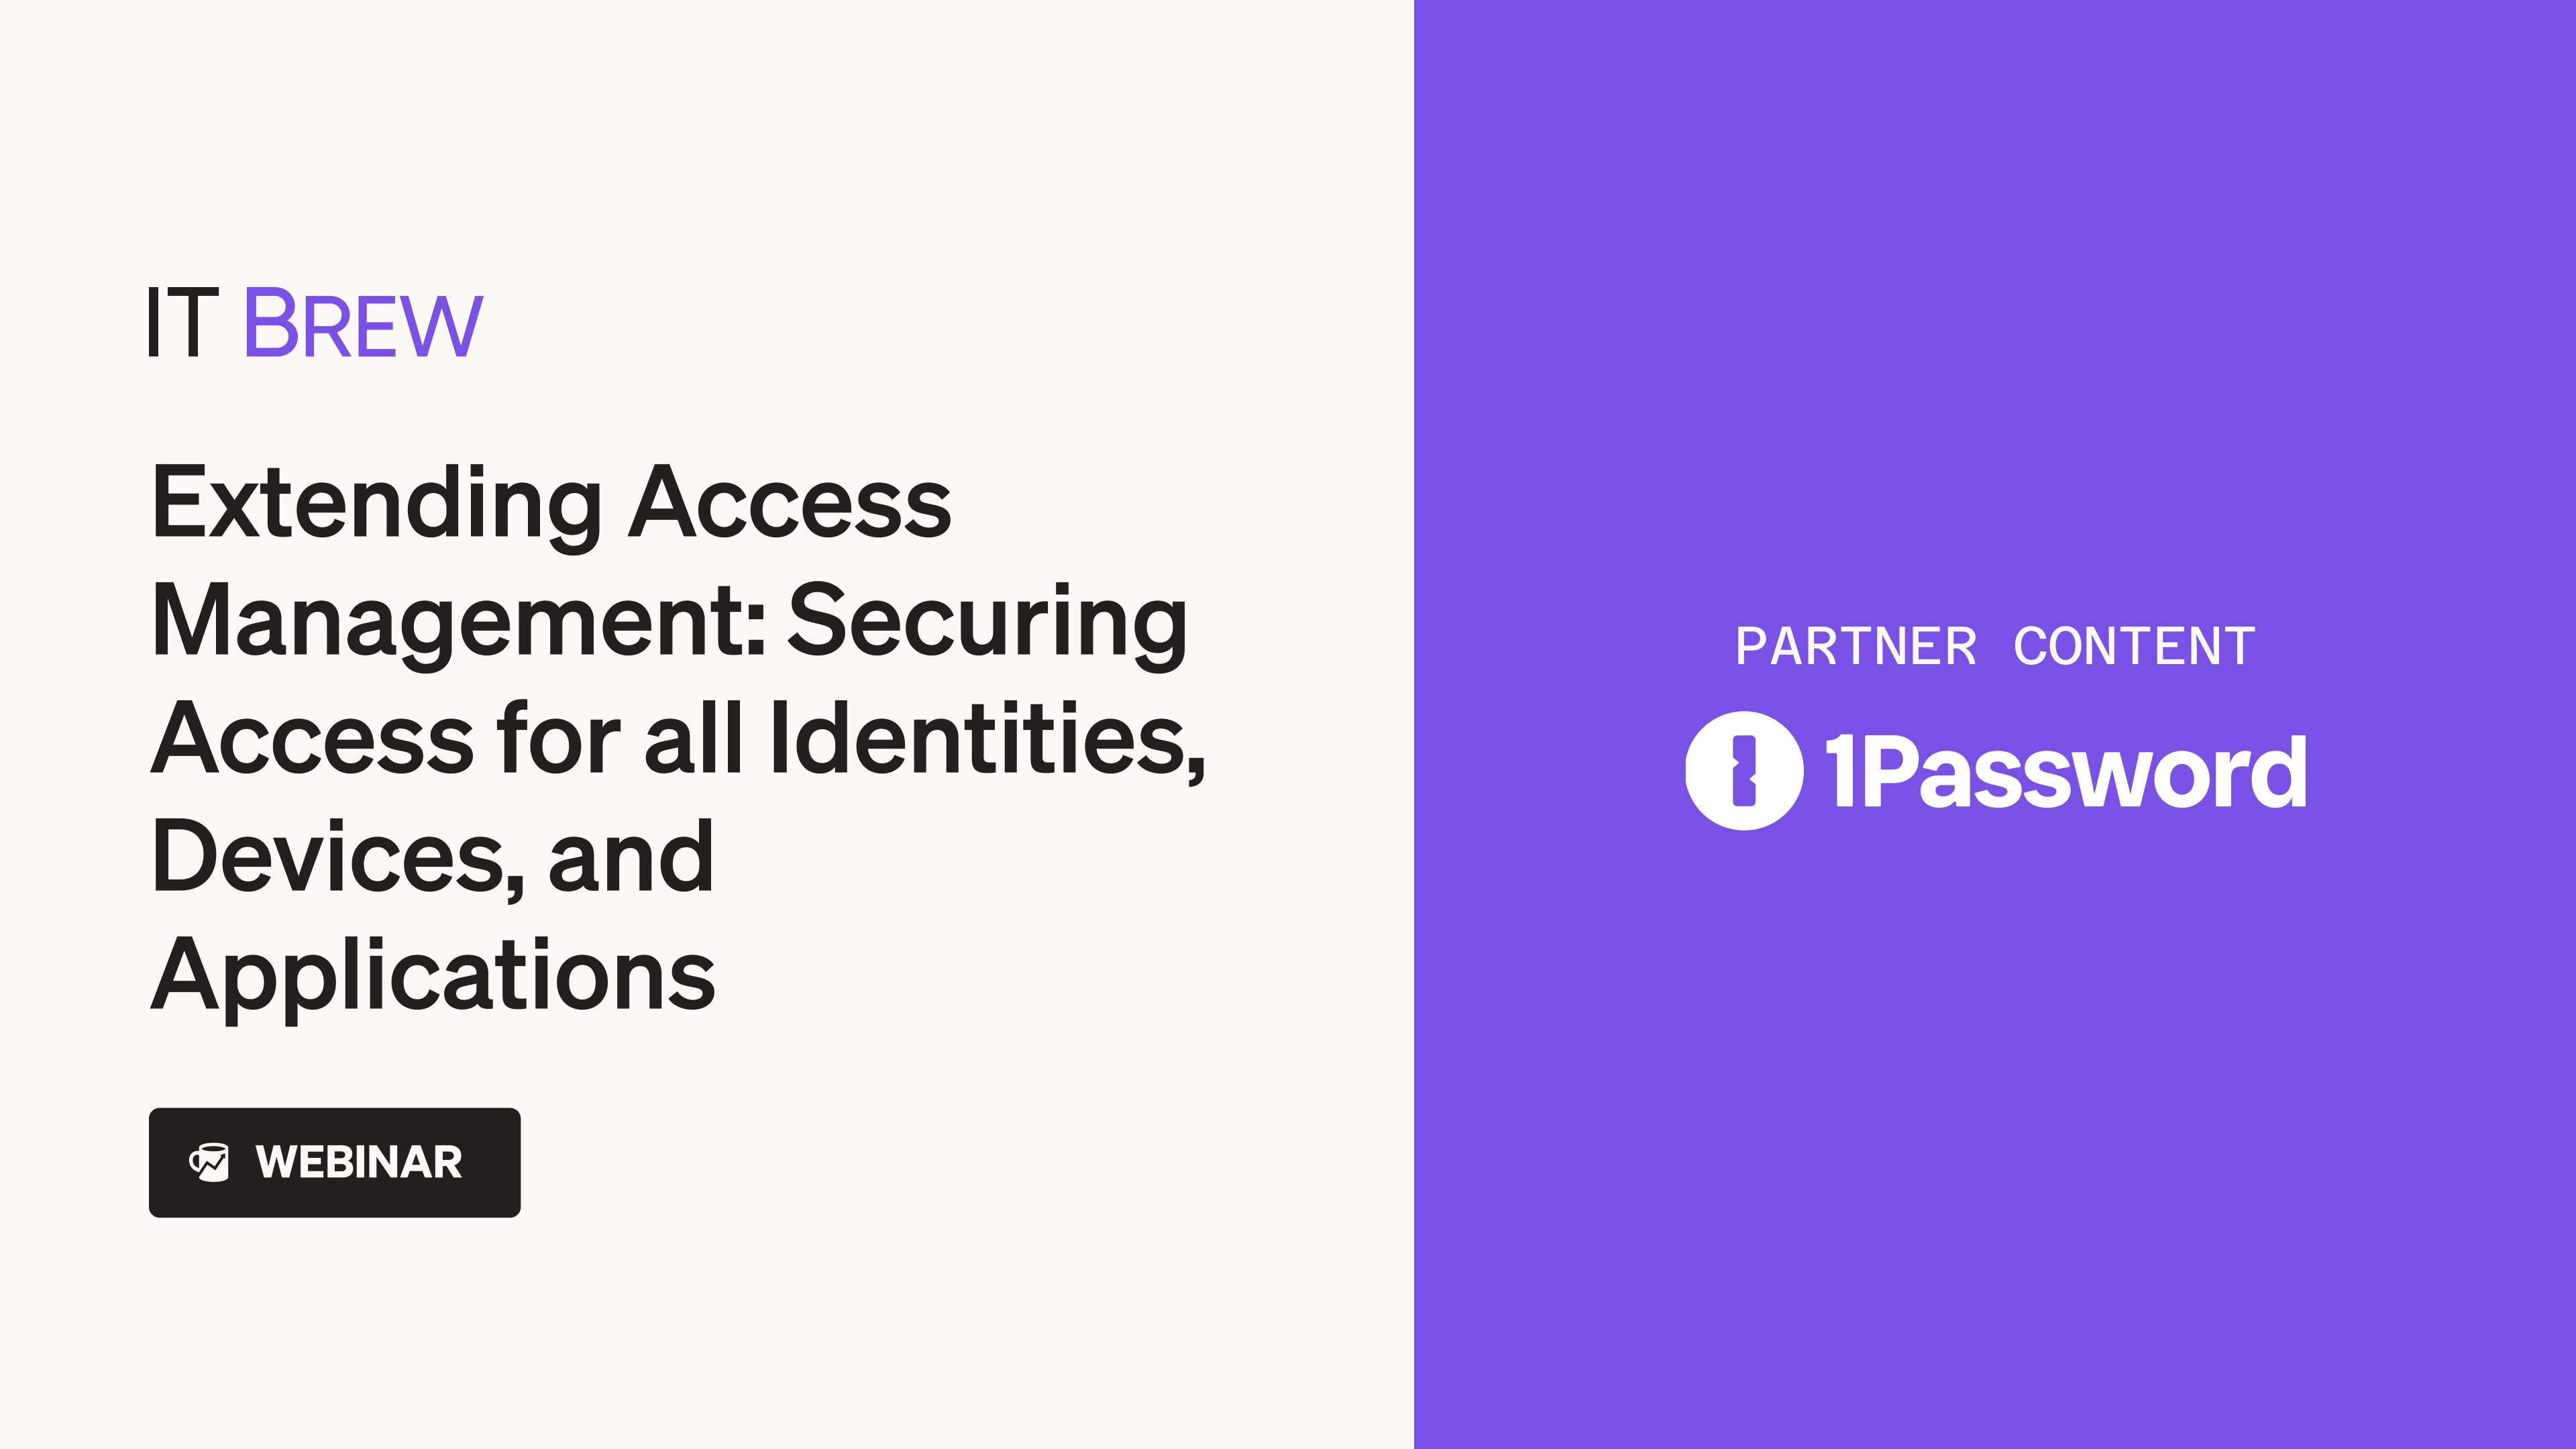 IT Brew’s virtual event hosted by 1Password, “Extending Access Management: Securing Access for all Identities, Devices, and Applications”